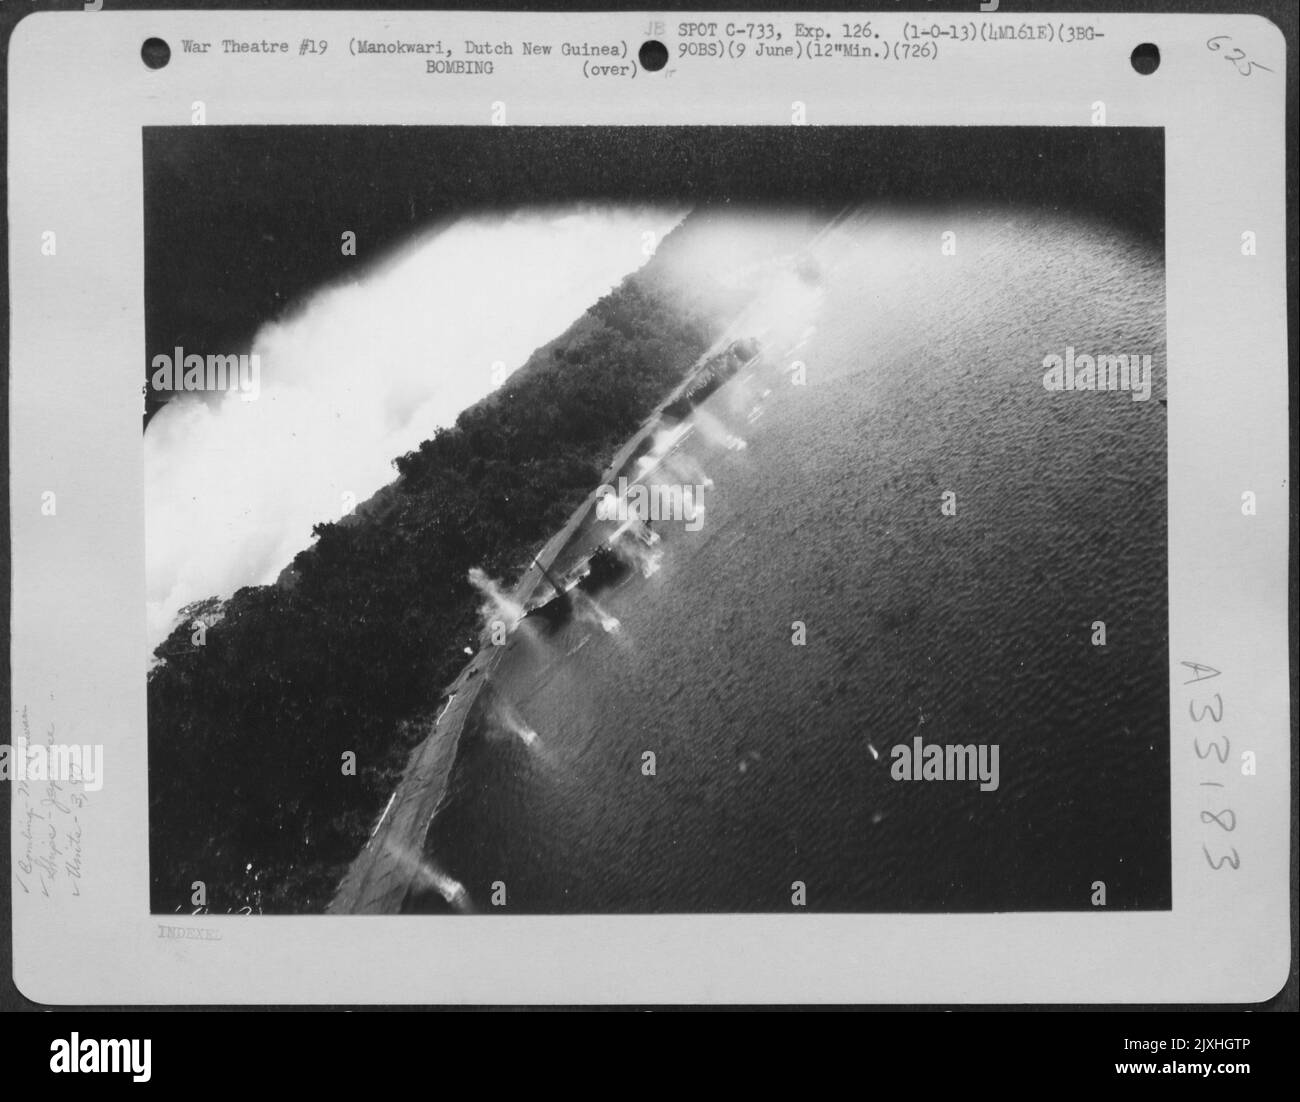 These Japaneseanese ships at Manokwari, Dutch New Guinea are the target of planes of the 5th Air Force's 3rd Bombardment Group, 90th Bombardment Squadron as they flew mast-high to carry out a mission on June 9, 1944. Stock Photo